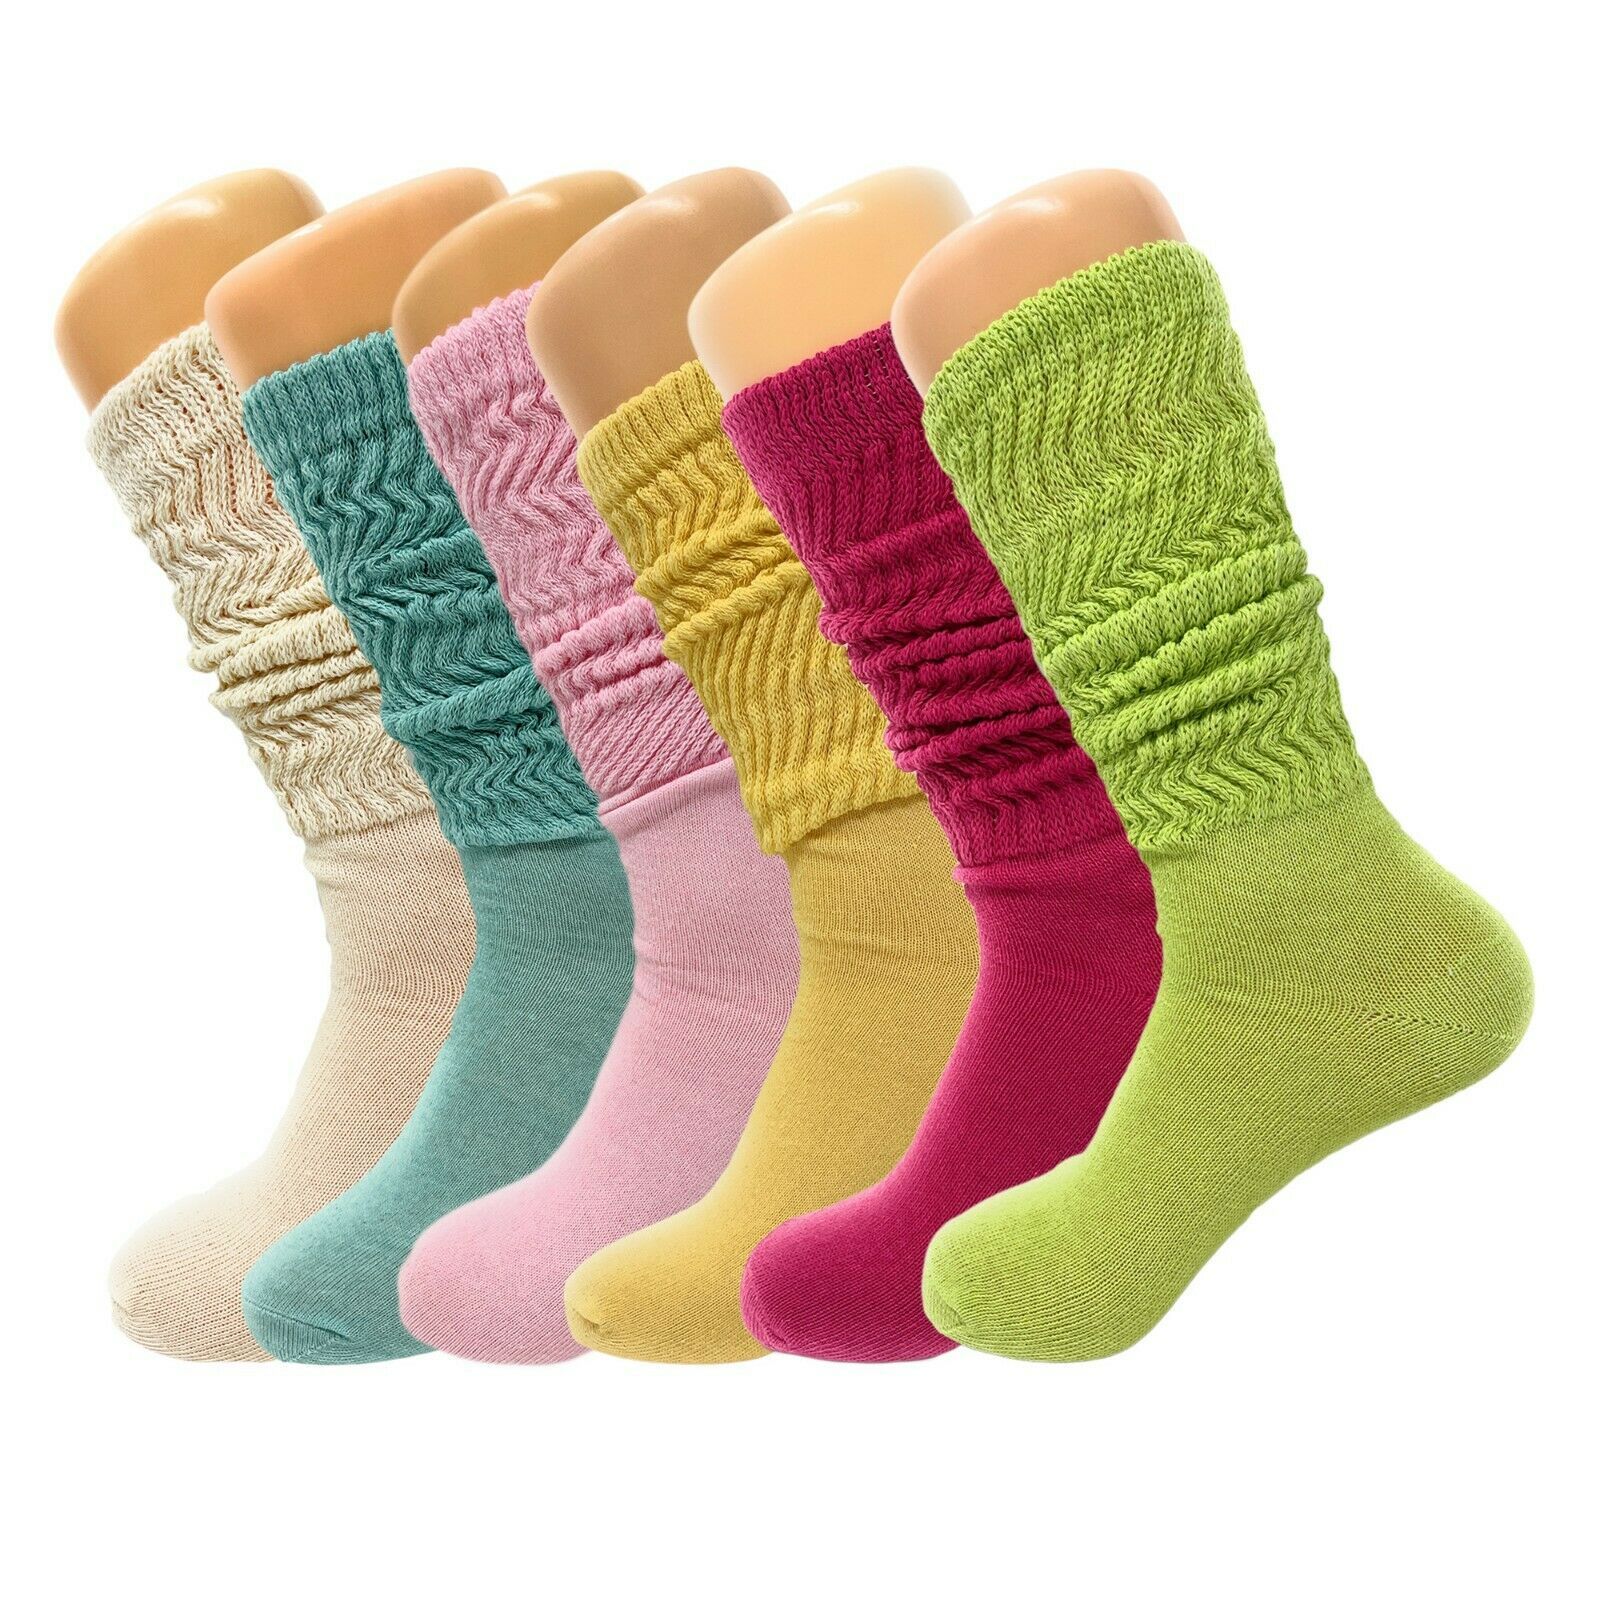 6 Pairs Pack Colorful Slouch Socks for Women with Thin Sole Size 9-11